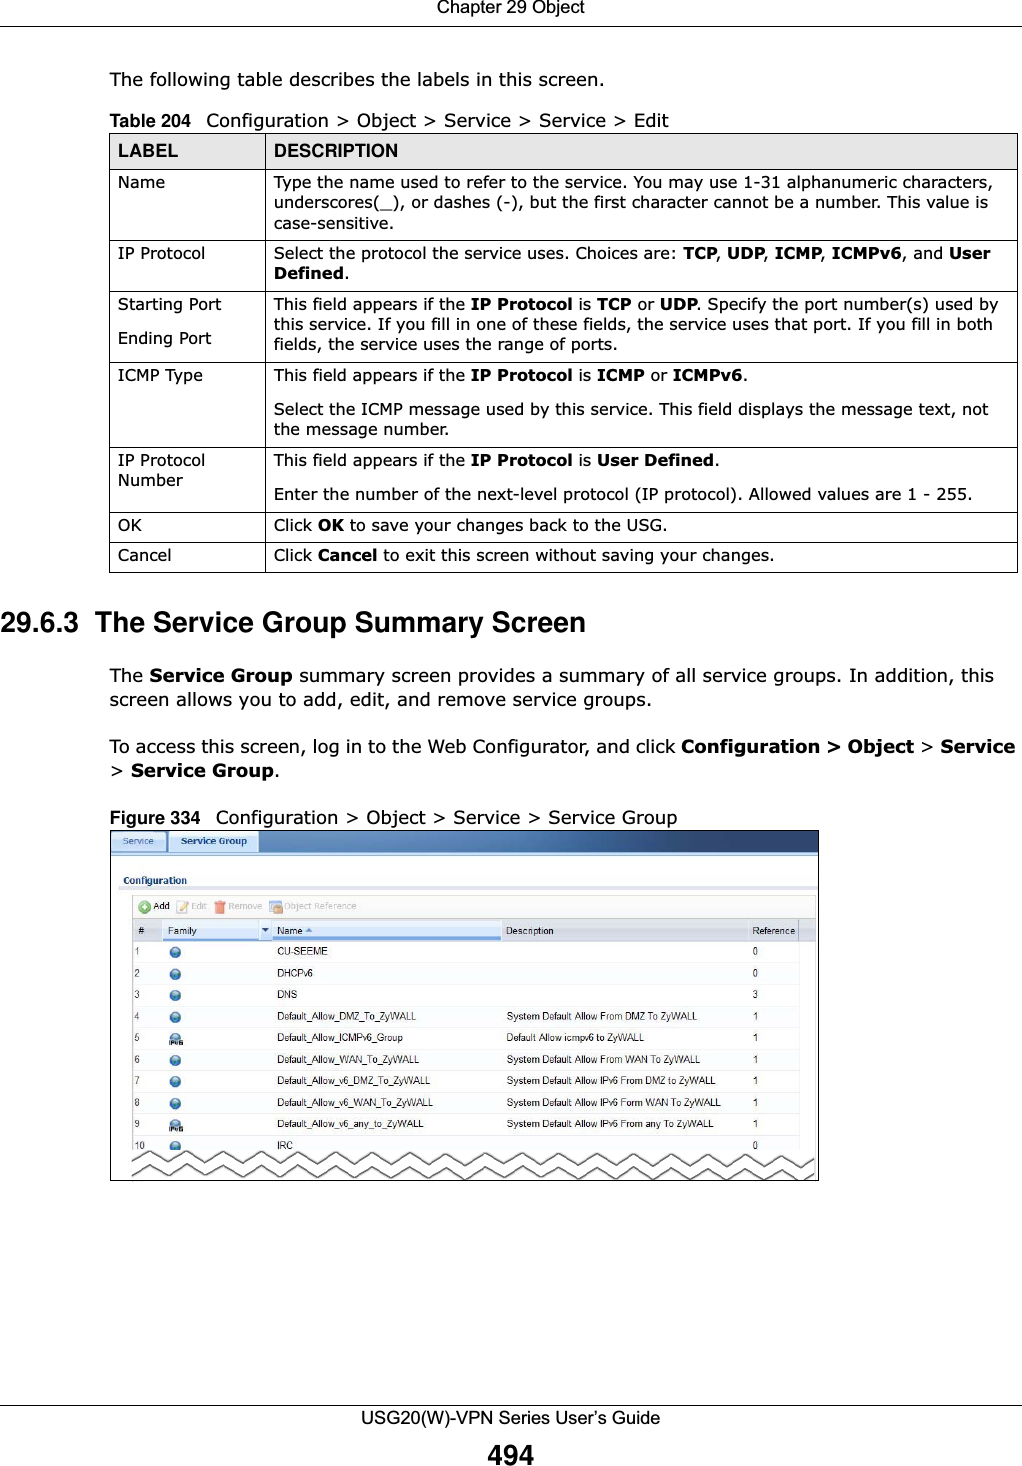 Chapter 29 ObjectUSG20(W)-VPN Series User’s Guide494The following table describes the labels in this screen.  29.6.3  The Service Group Summary Screen The Service Group summary screen provides a summary of all service groups. In addition, this screen allows you to add, edit, and remove service groups.To access this screen, log in to the Web Configurator, and click Configuration &gt; Object &gt; Service &gt; Service Group.Figure 334   Configuration &gt; Object &gt; Service &gt; Service Group   Table 204   Configuration &gt; Object &gt; Service &gt; Service &gt; EditLABEL DESCRIPTIONName Type the name used to refer to the service. You may use 1-31 alphanumeric characters, underscores(_), or dashes (-), but the first character cannot be a number. This value is case-sensitive.IP Protocol Select the protocol the service uses. Choices are: TCP, UDP, ICMP, ICMPv6, and User Defined.Starting PortEnding PortThis field appears if the IP Protocol is TCP or UDP. Specify the port number(s) used by this service. If you fill in one of these fields, the service uses that port. If you fill in both fields, the service uses the range of ports.ICMP Type This field appears if the IP Protocol is ICMP or ICMPv6.Select the ICMP message used by this service. This field displays the message text, not the message number.IP Protocol NumberThis field appears if the IP Protocol is User Defined.Enter the number of the next-level protocol (IP protocol). Allowed values are 1 - 255.OK Click OK to save your changes back to the USG.Cancel Click Cancel to exit this screen without saving your changes.